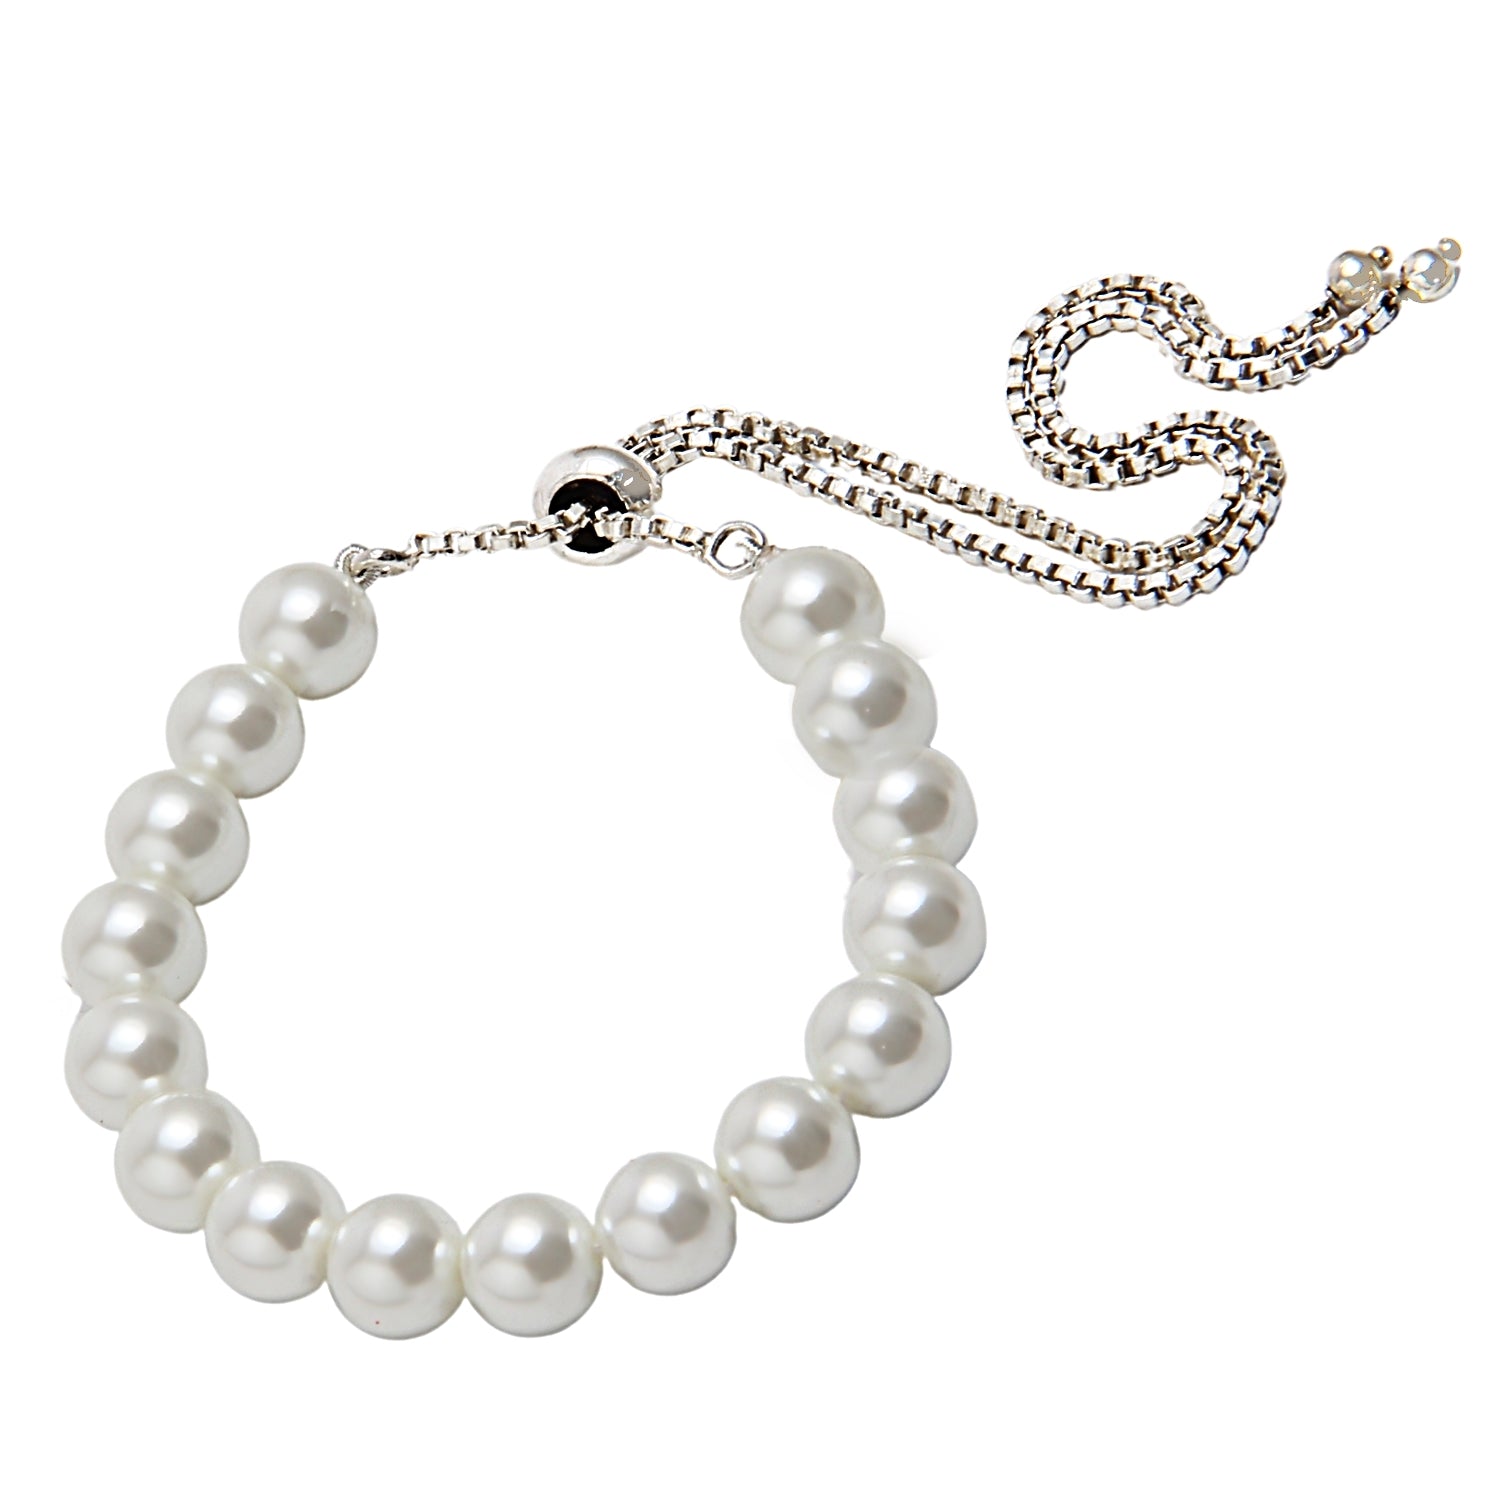 Glossy Pure White 8MM Shell-Pearls Bracelet